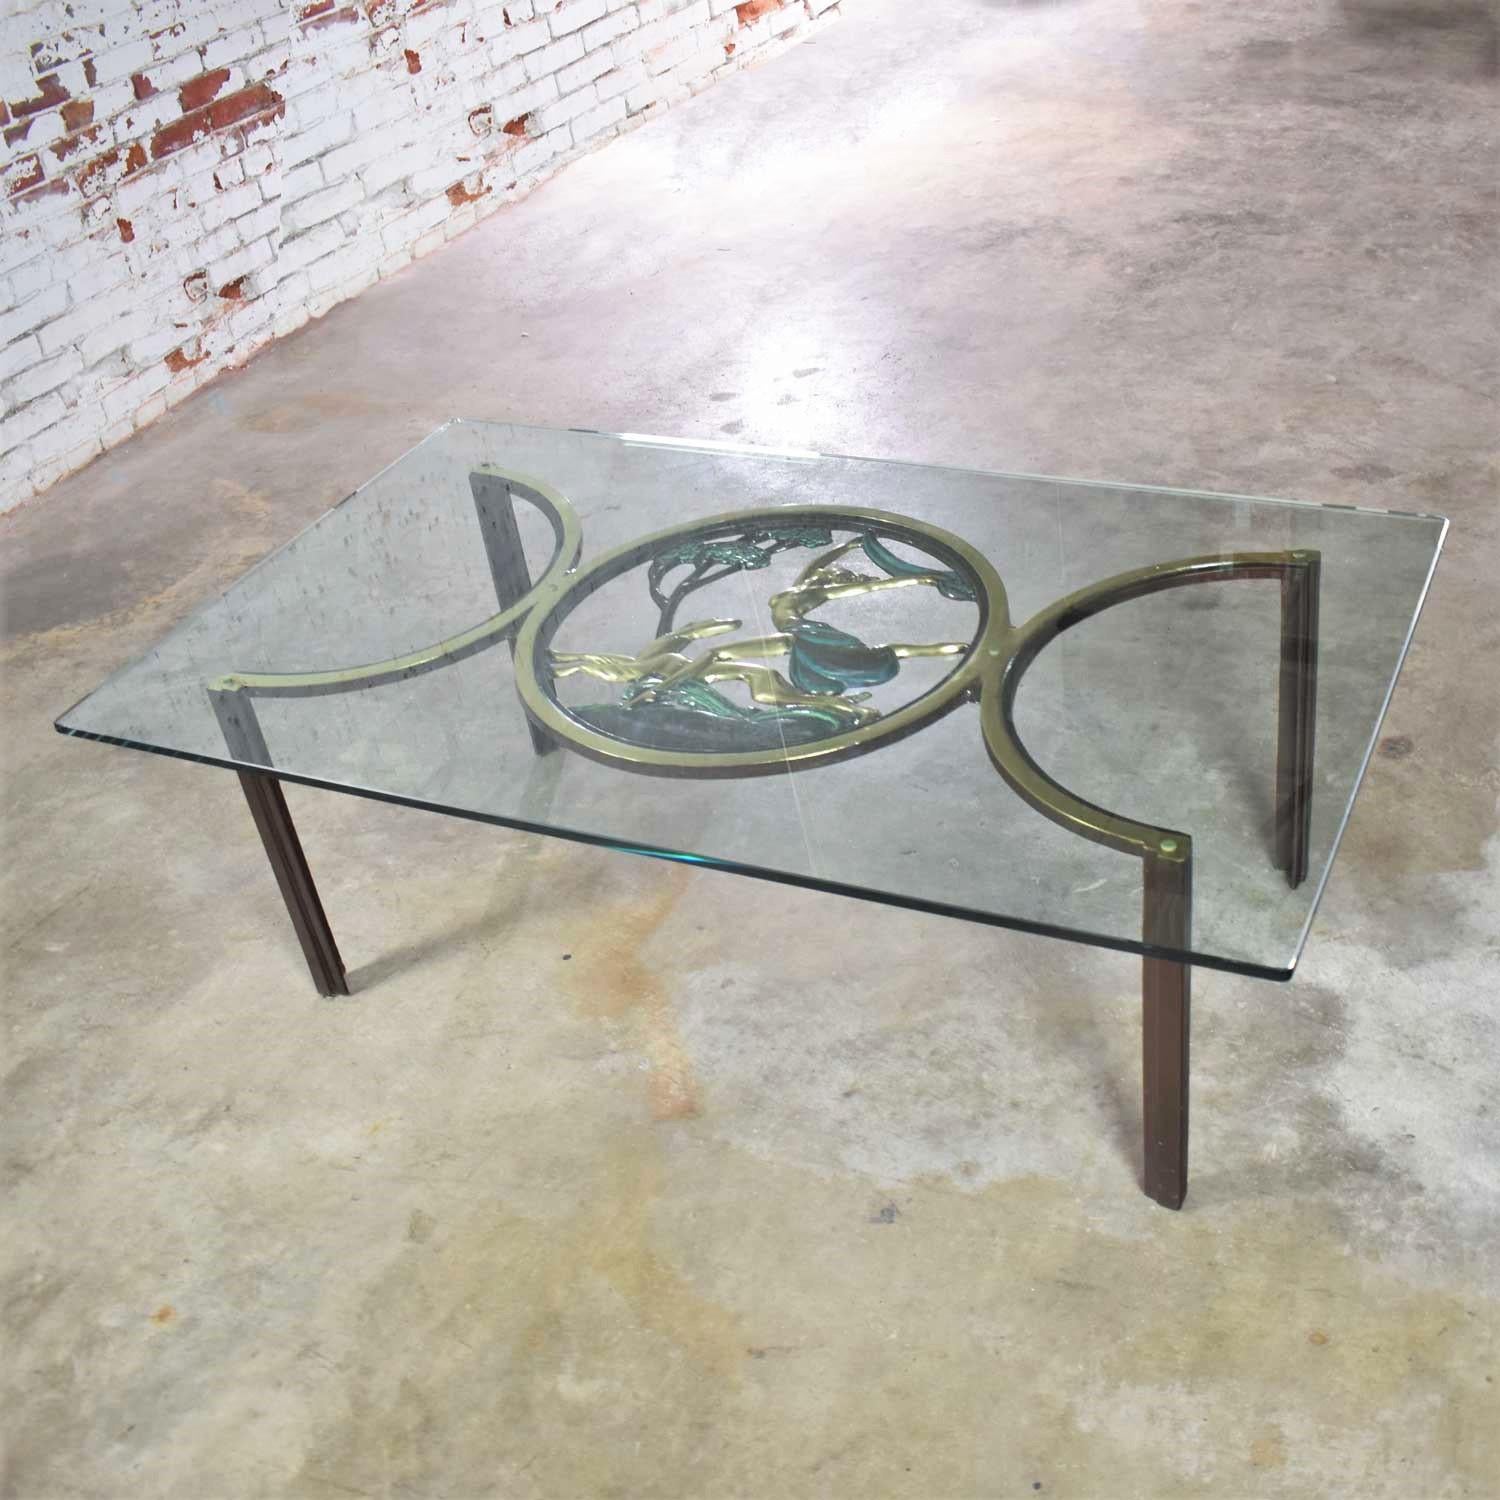 Cast Art Deco Style Bronze Coffee Table with Diana the Huntress Medallion & Glass Top